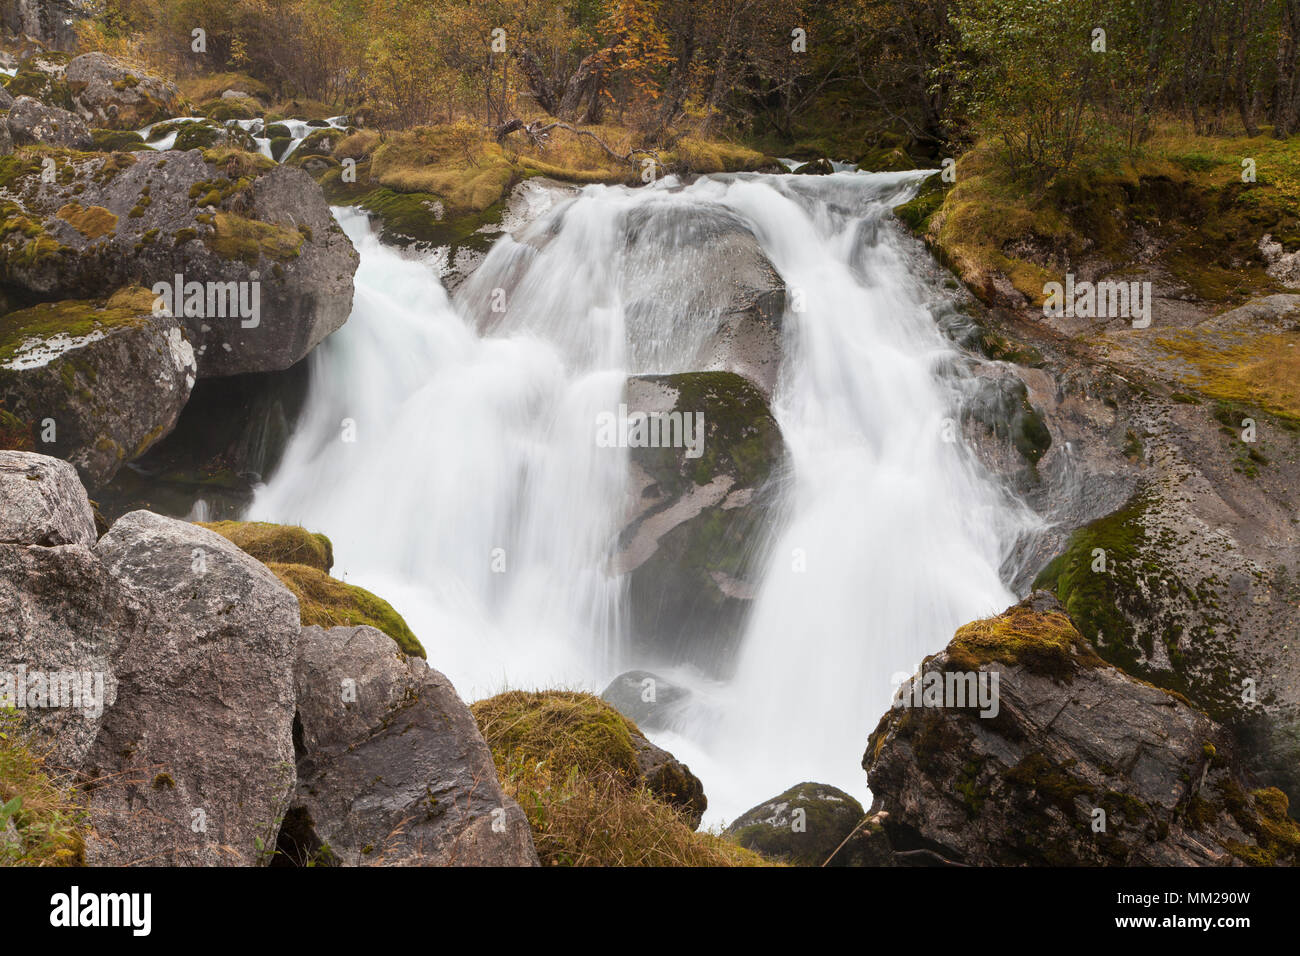 Small Waterfall on the river Briksdalselva, fed by the melting of Briksdal glacier, Jostedalsbreen National Park, Sogn og Fjordane, Norway. Stock Photo